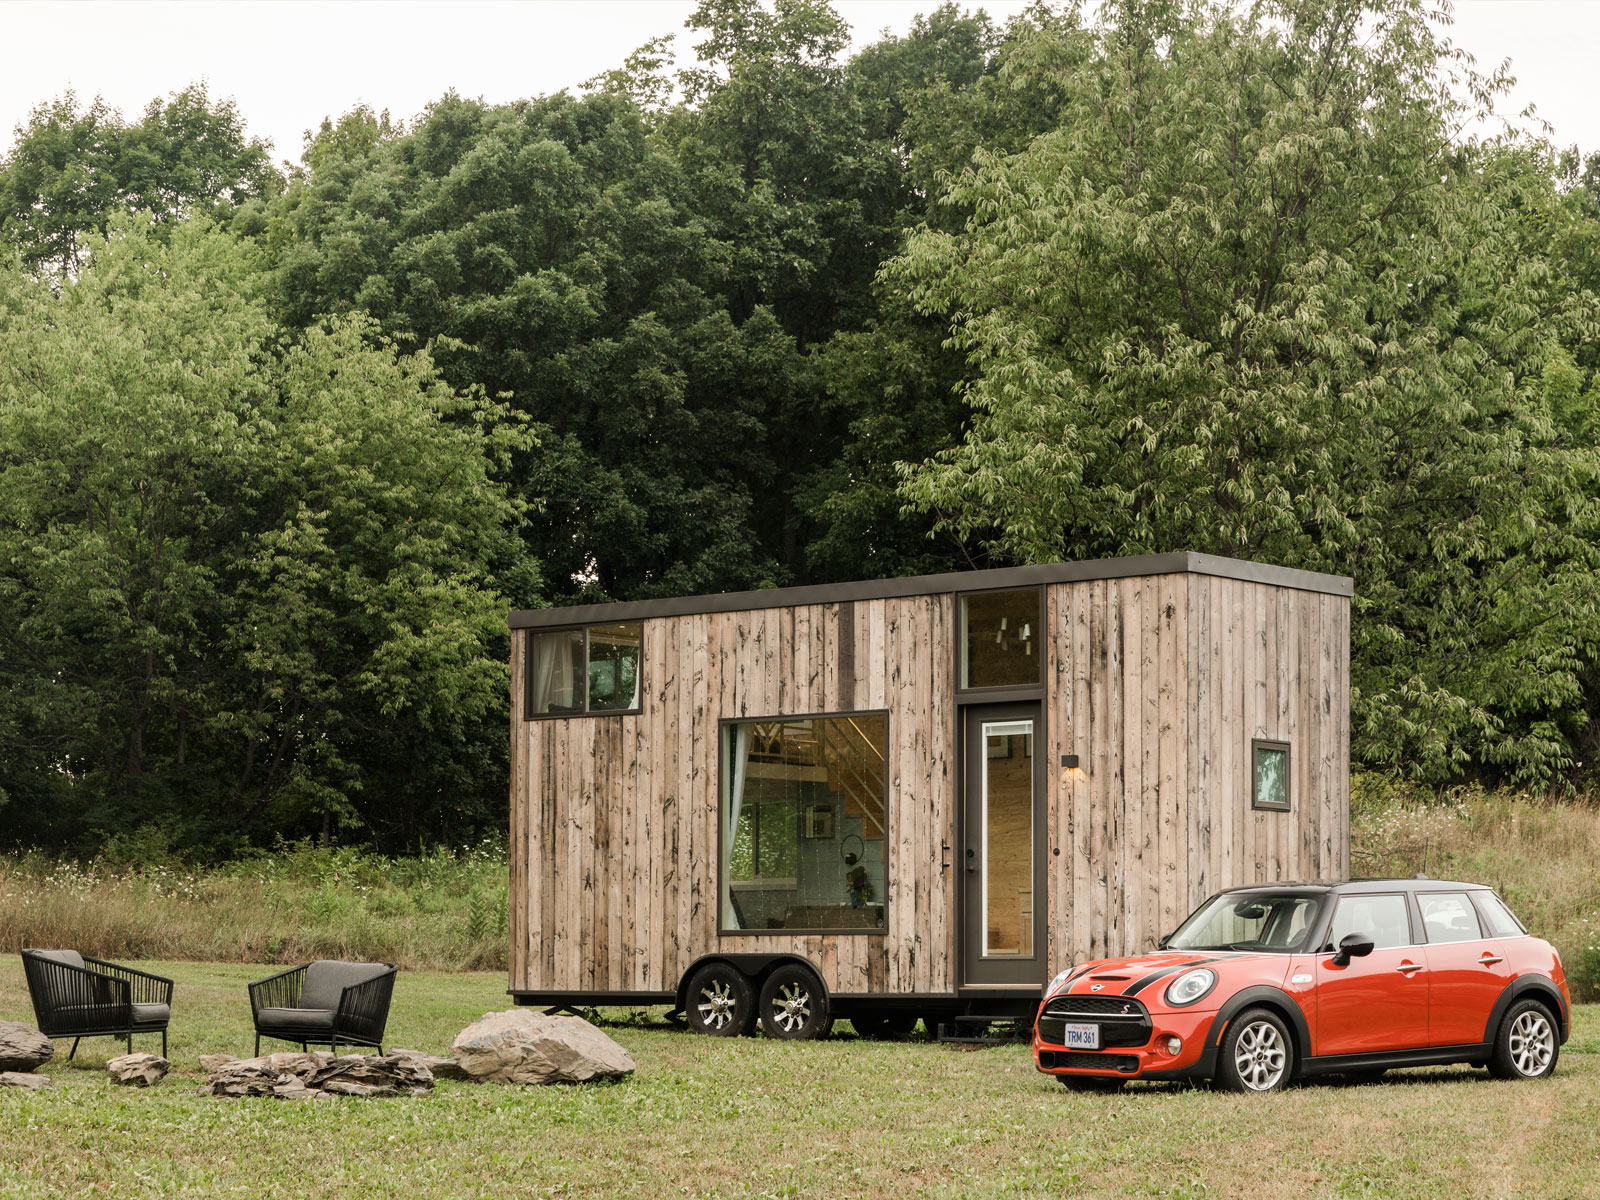 Mini cars and Airbnb offer weekend escape 